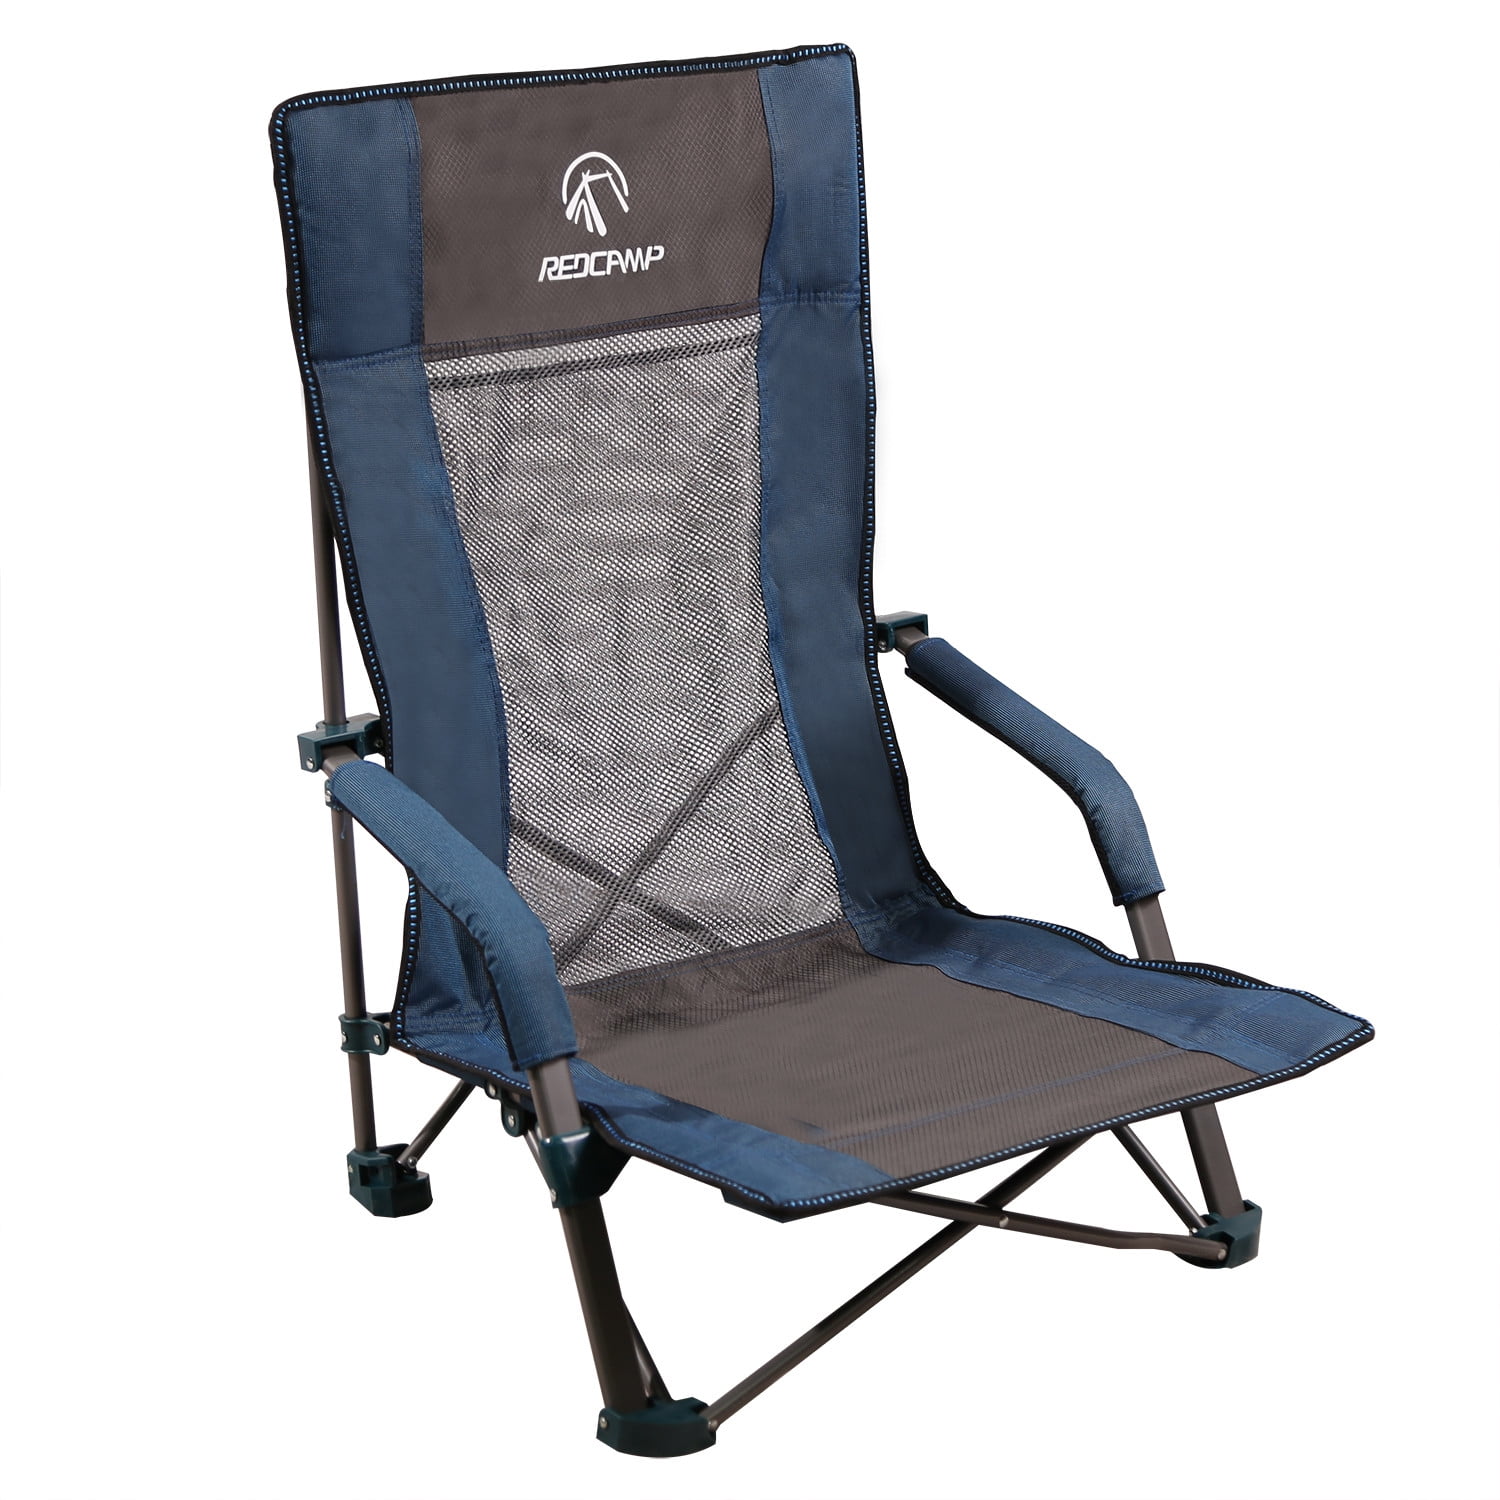 Redcamp Low Beach Chair Folding Lightweight With High Back Portable Outdoor Concert Chair For